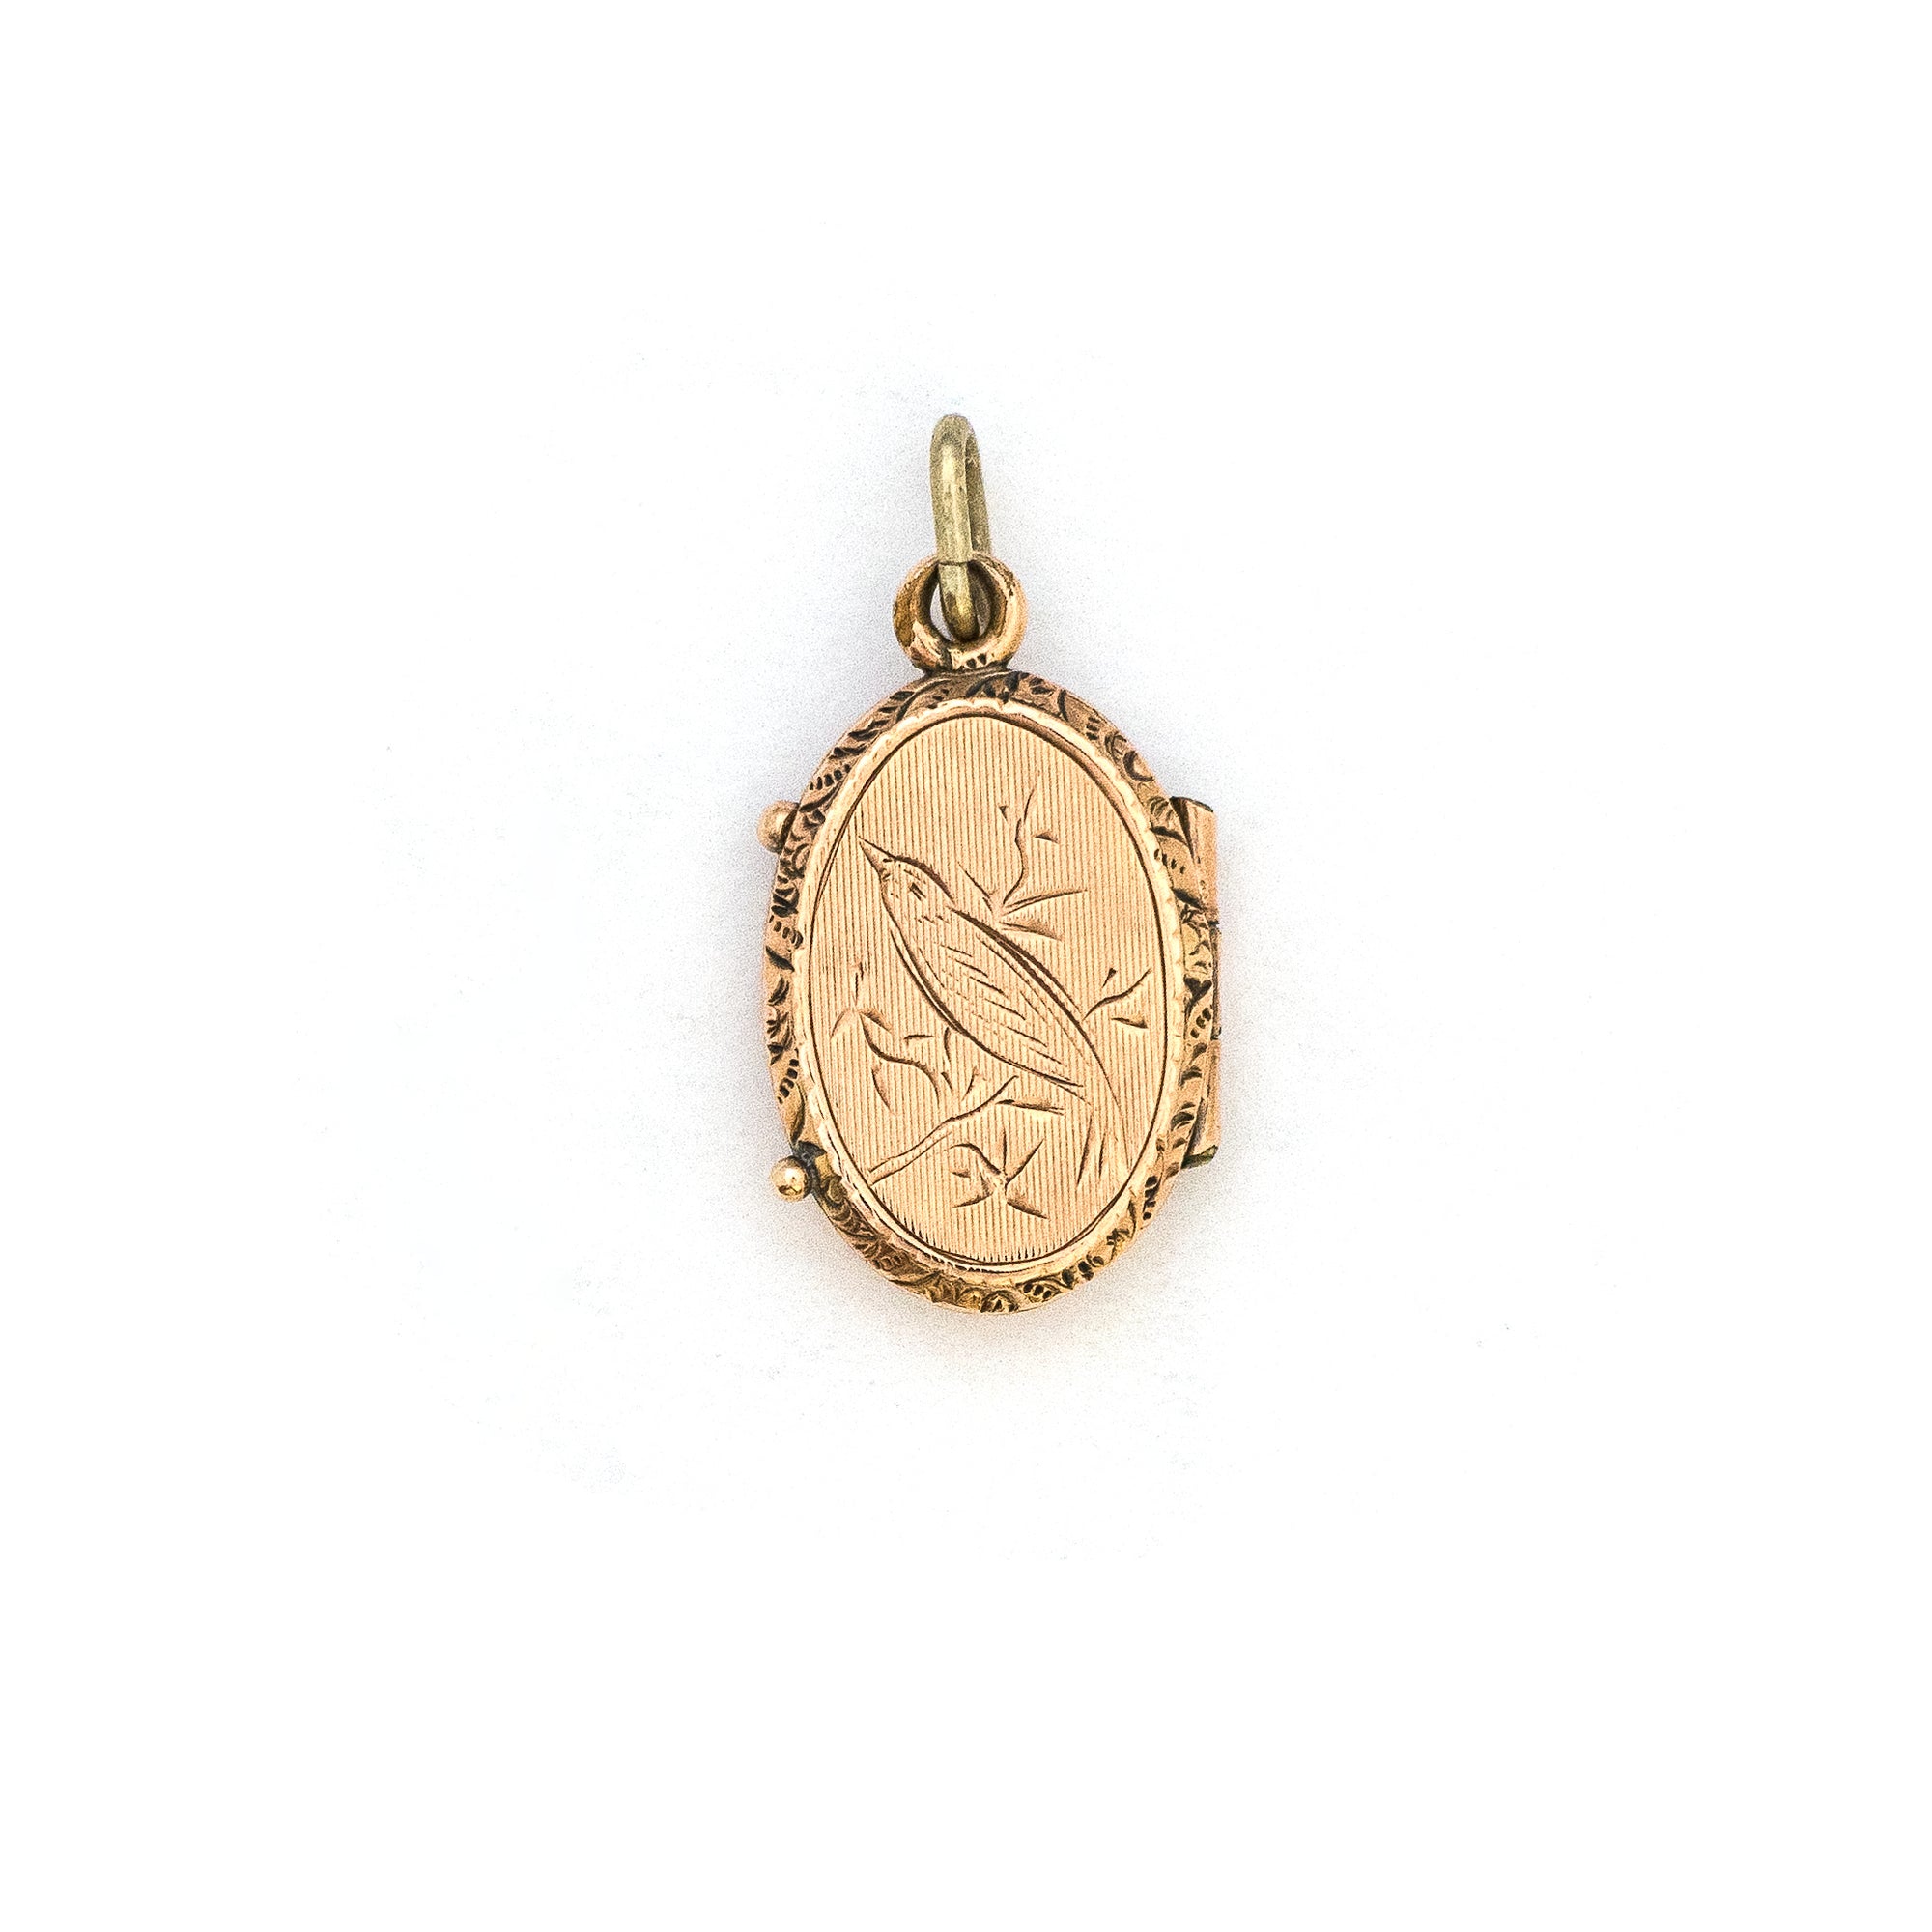 This petite oval 14K gold locket features a classic Victorian sparrow surrounded by carefully etched greenery on the front and back. It opens to hold two photos and pairs perfectly with one of our antique 14K gold chains. Front locket view